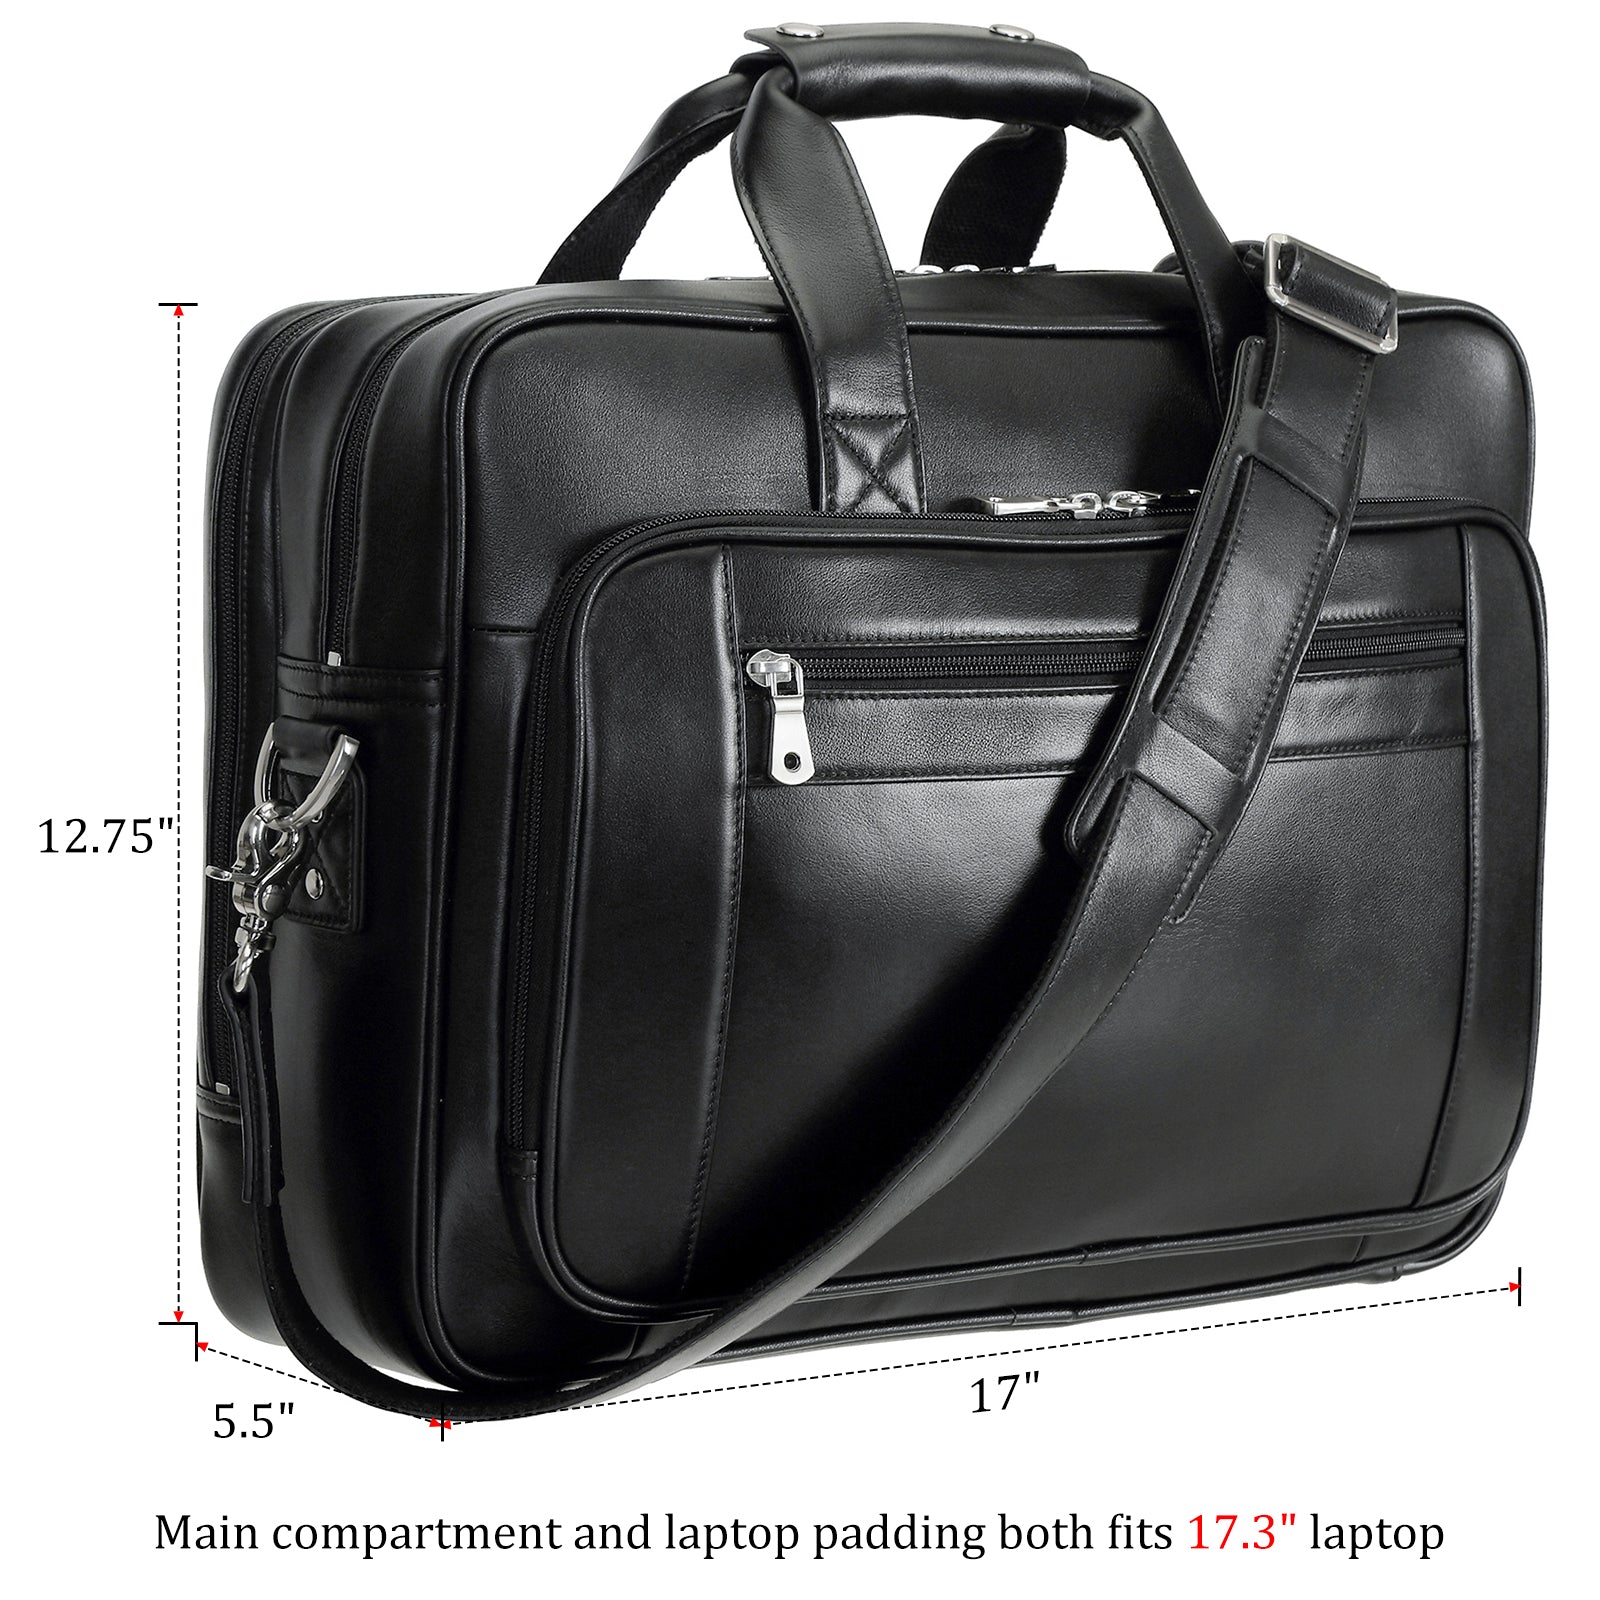 Augus Leather Briefcase Business Travel Genuine Leather Duffel Bags for Men Laptop Bag Fits 17 Inches Laptop with YKK Zipper